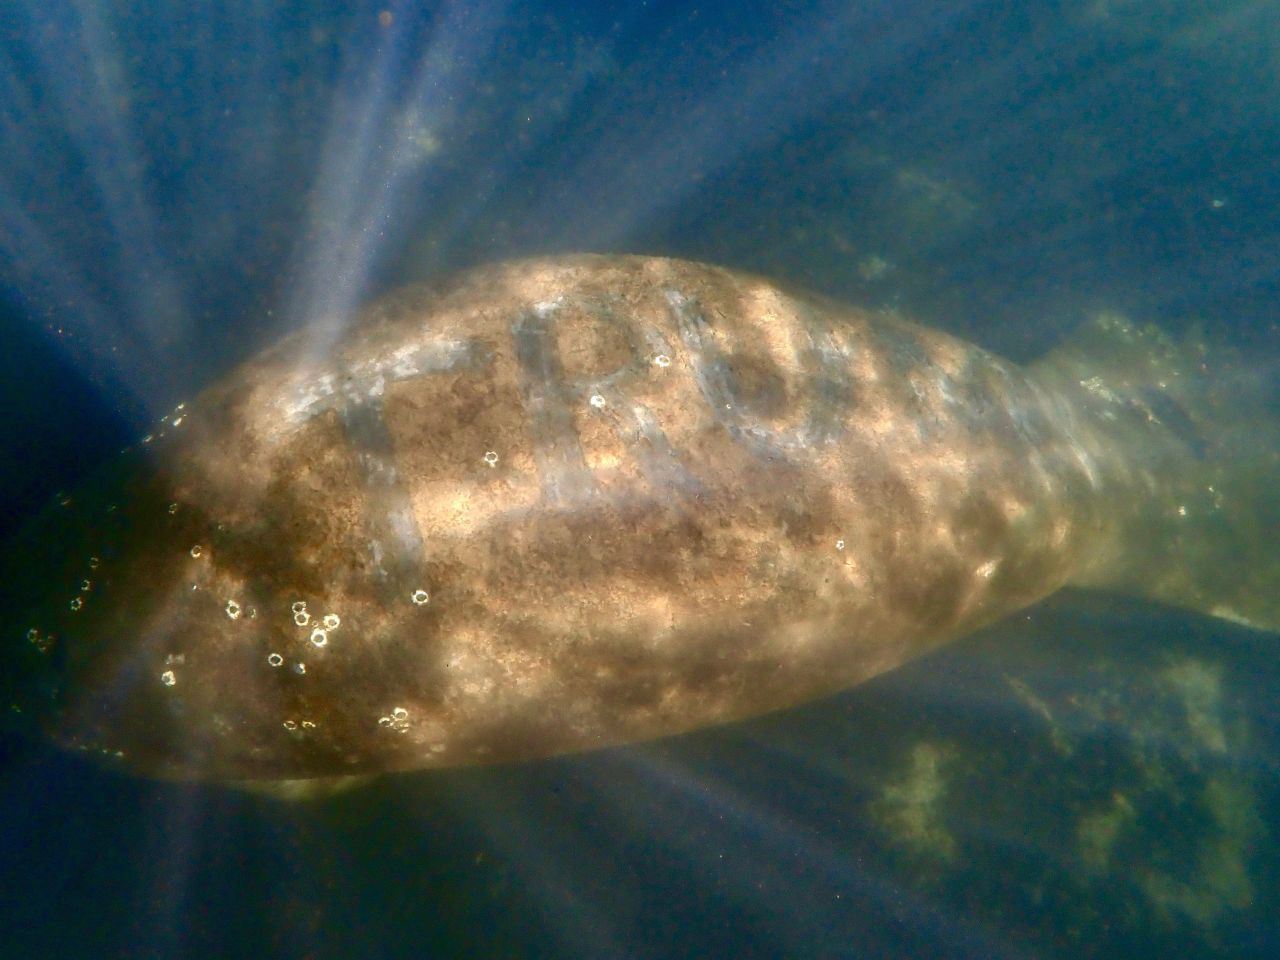 A manatee was discovered Sunday, January 10 in Florida's Homosassa River with <a href="https://www.cnn.com/2021/01/12/us/manatee-with-trump-on-its-back-trnd/index.html" target="_blank">"Trump" written on its back</a>, according to a news release from the Center for Biological Diversity. A reward is being offered for information to help authorities find and prosecute whomever wrote on the animal's back. 